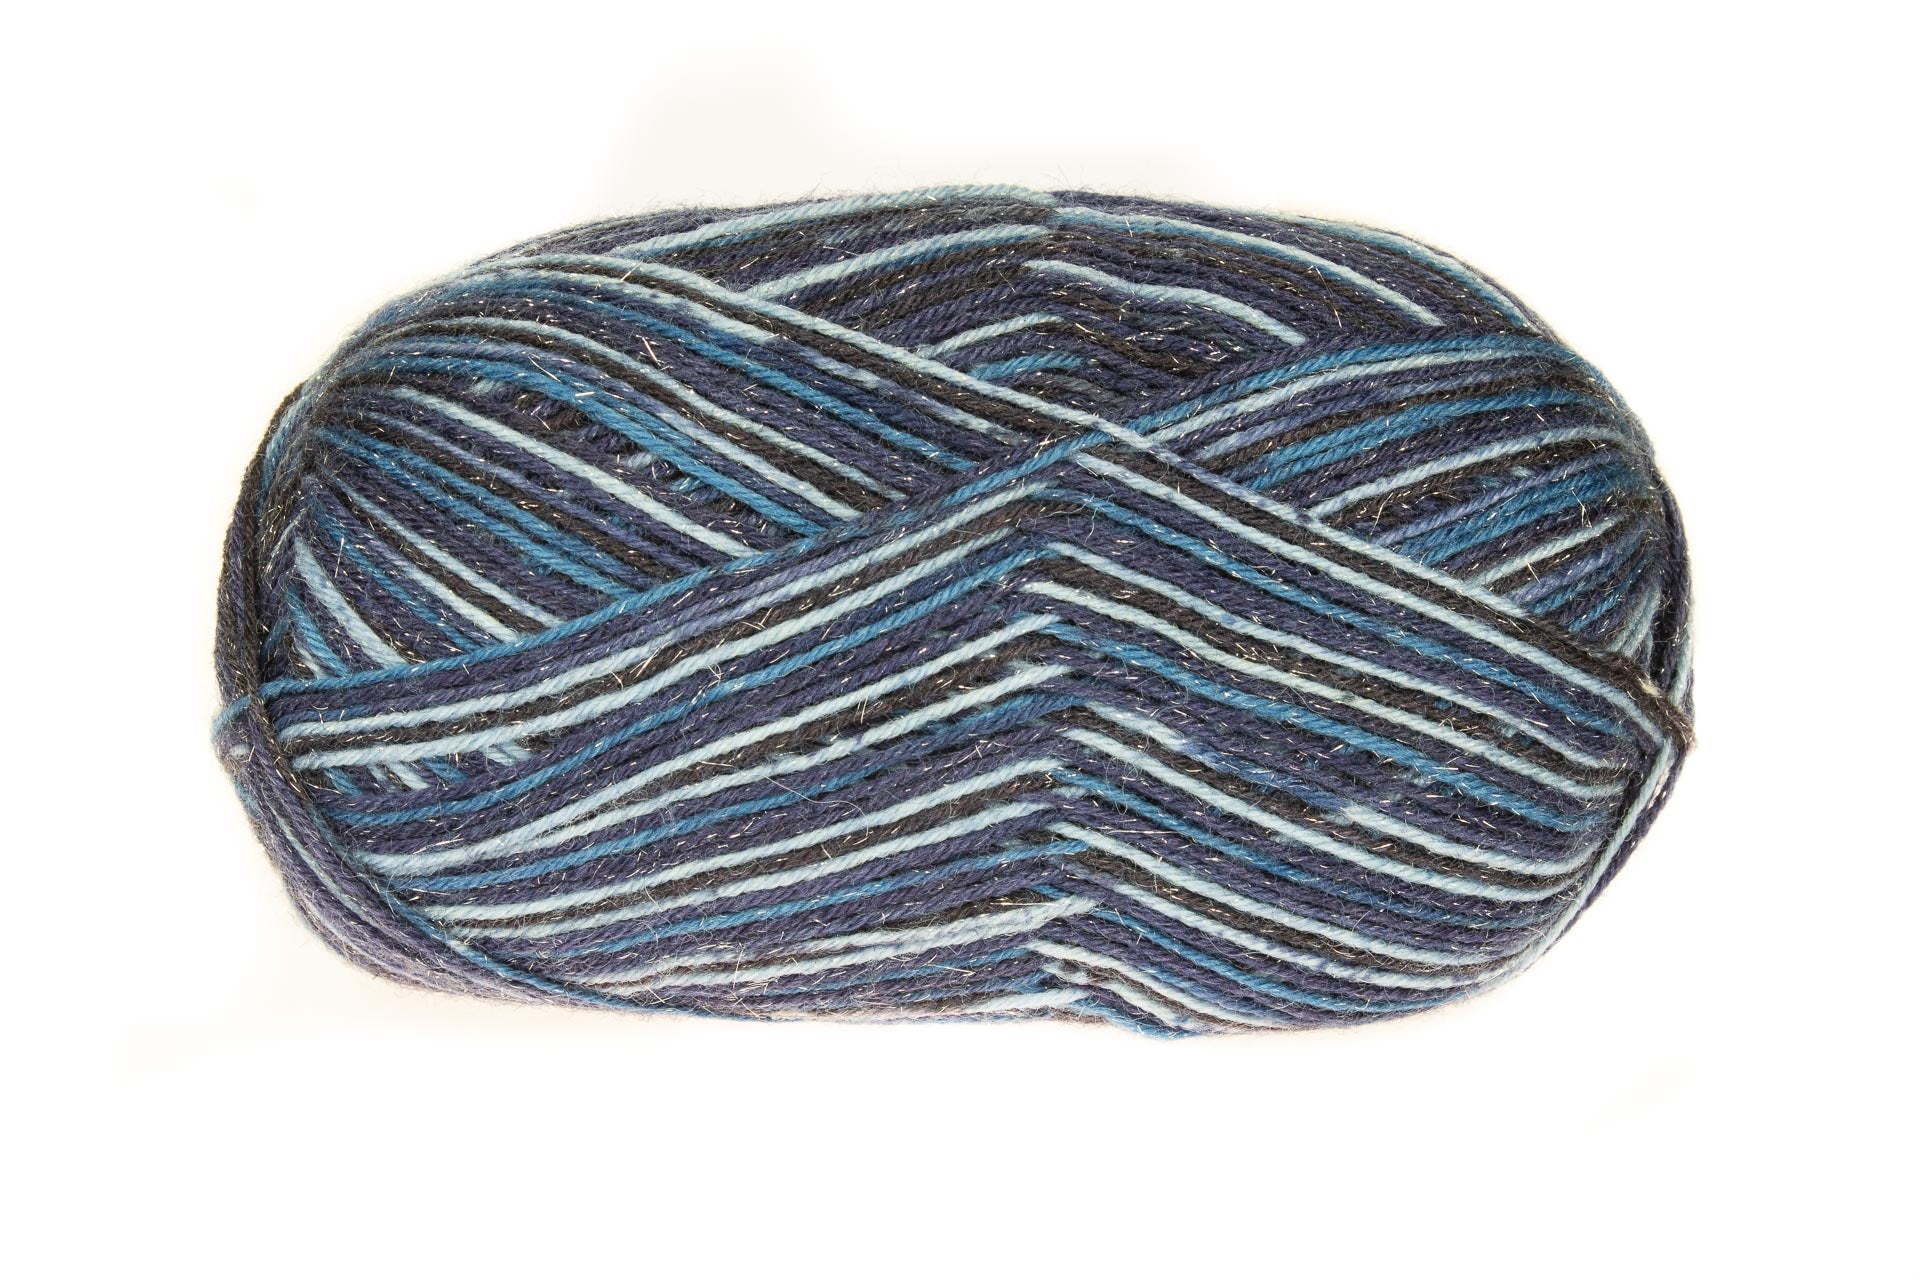 Signature 4ply - Christmas Yarn in 2023